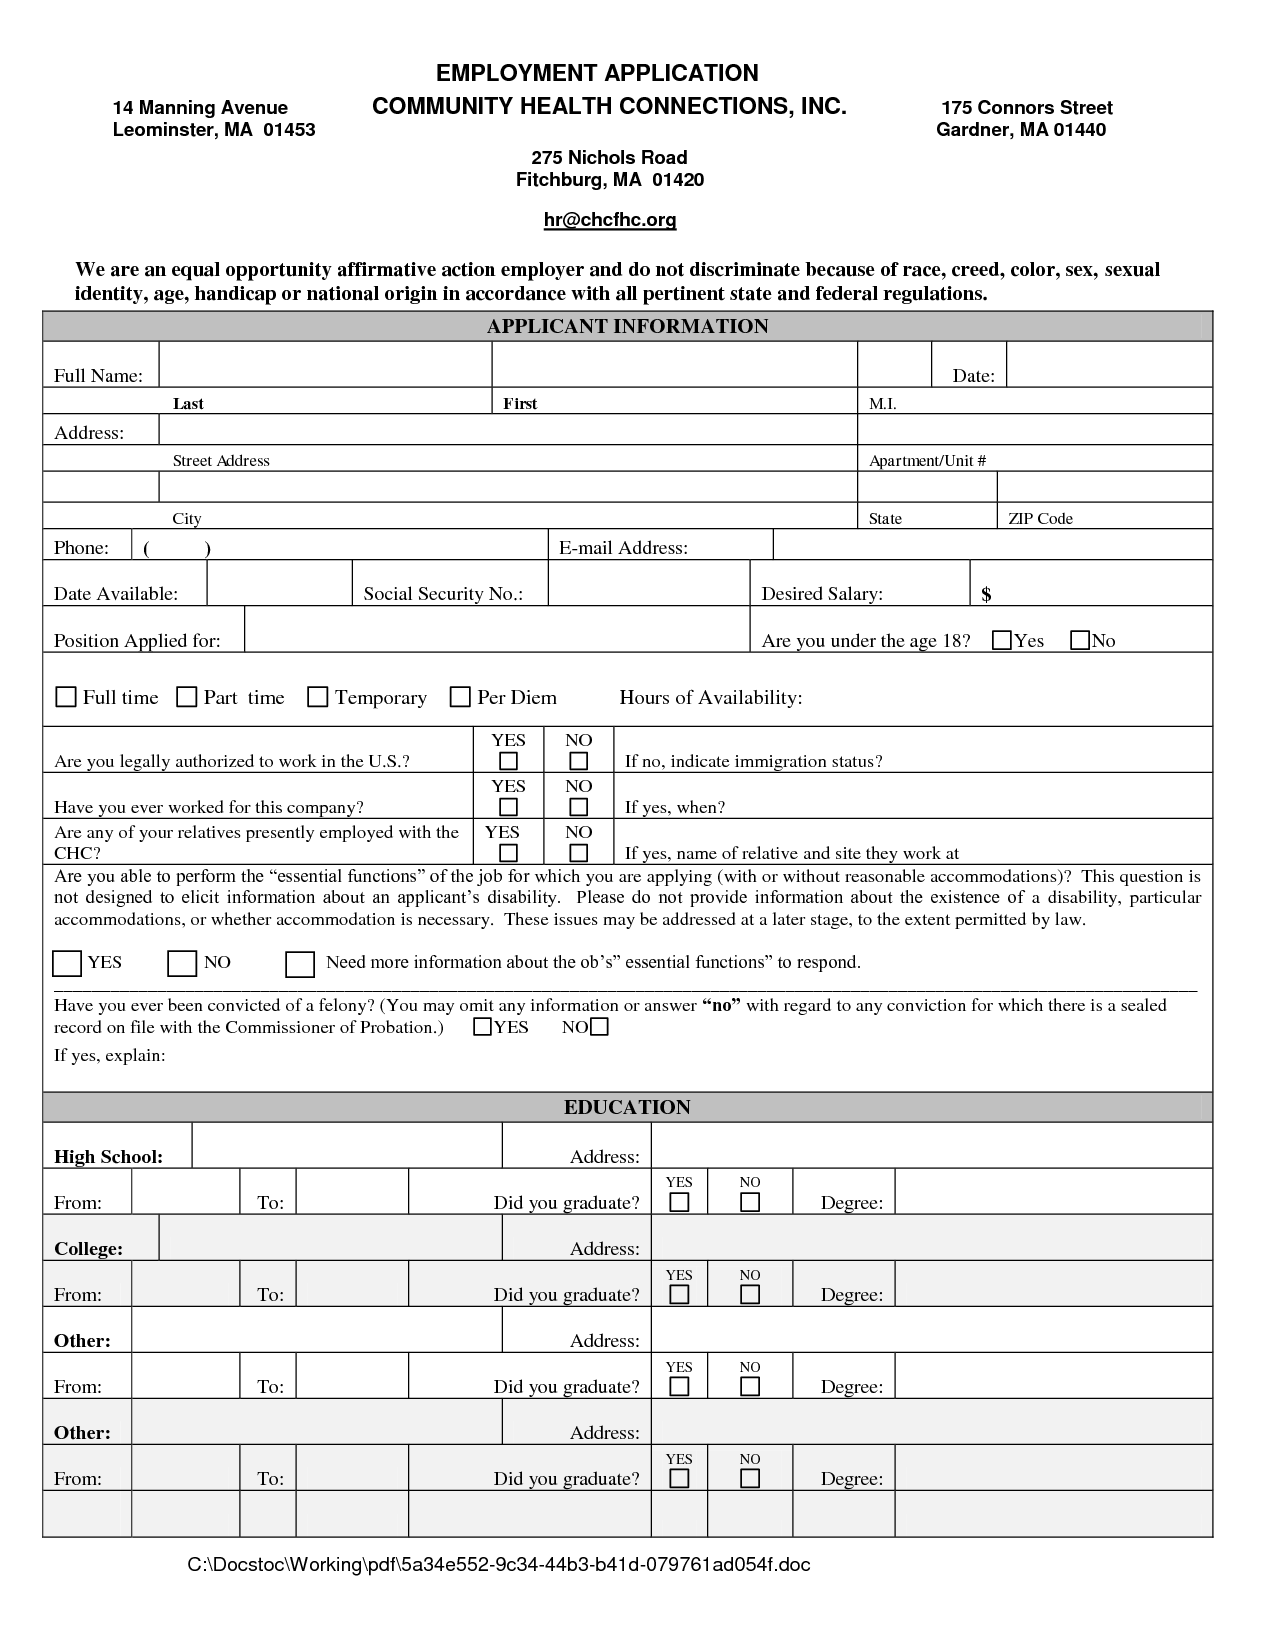 free employment application template download canre klonec co